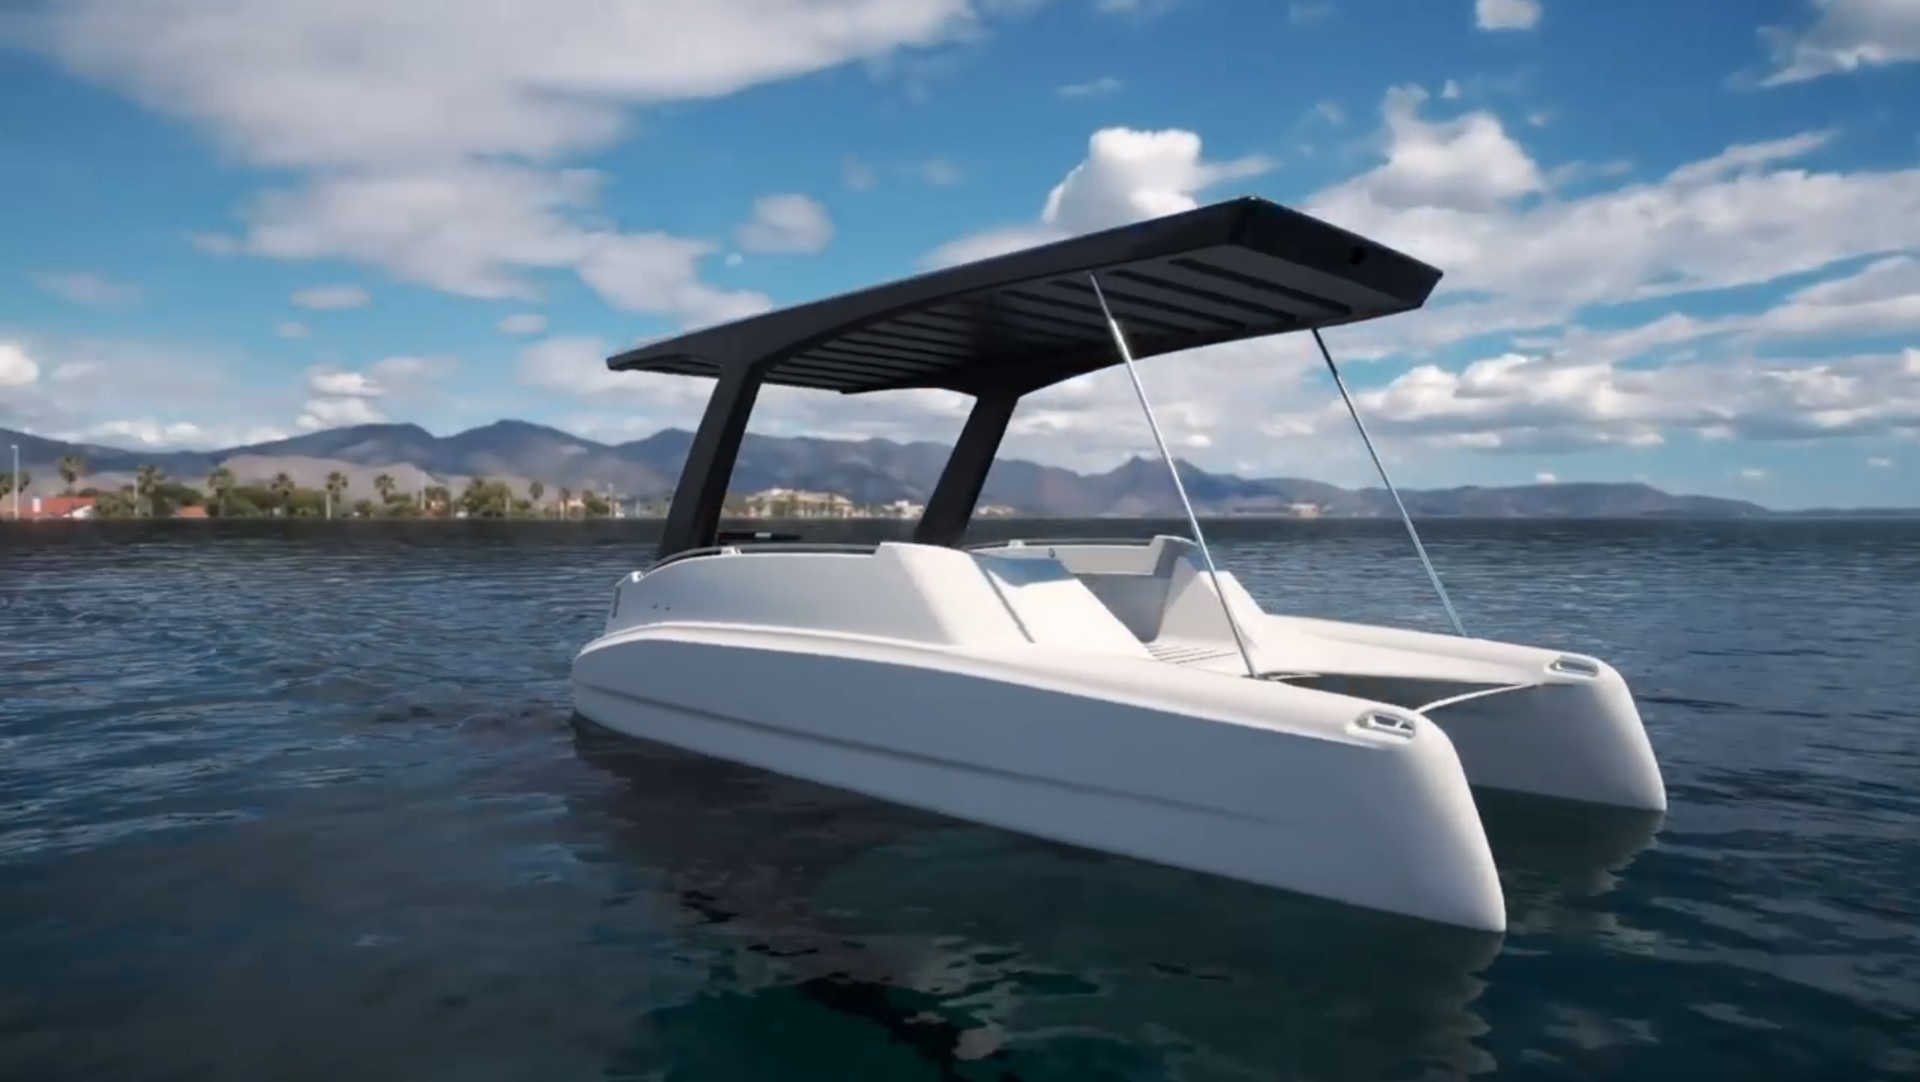 Durable, Solar-Powered Catamaran Wants to Be the Ford Model T of Water Transport